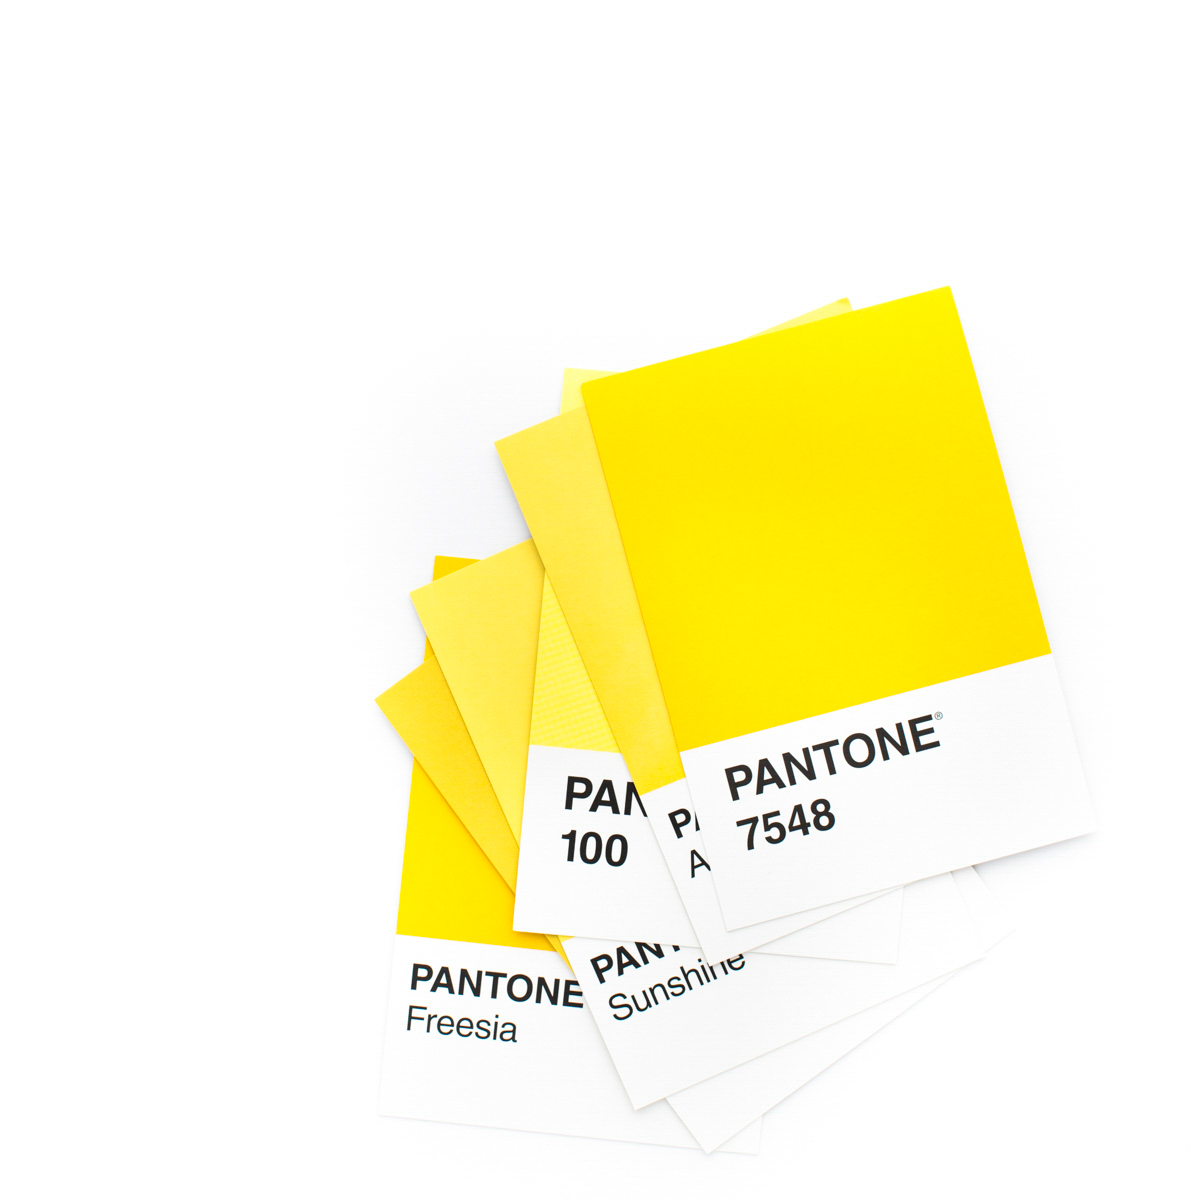 pantone swatches in the color 7548, a sunshine yellow